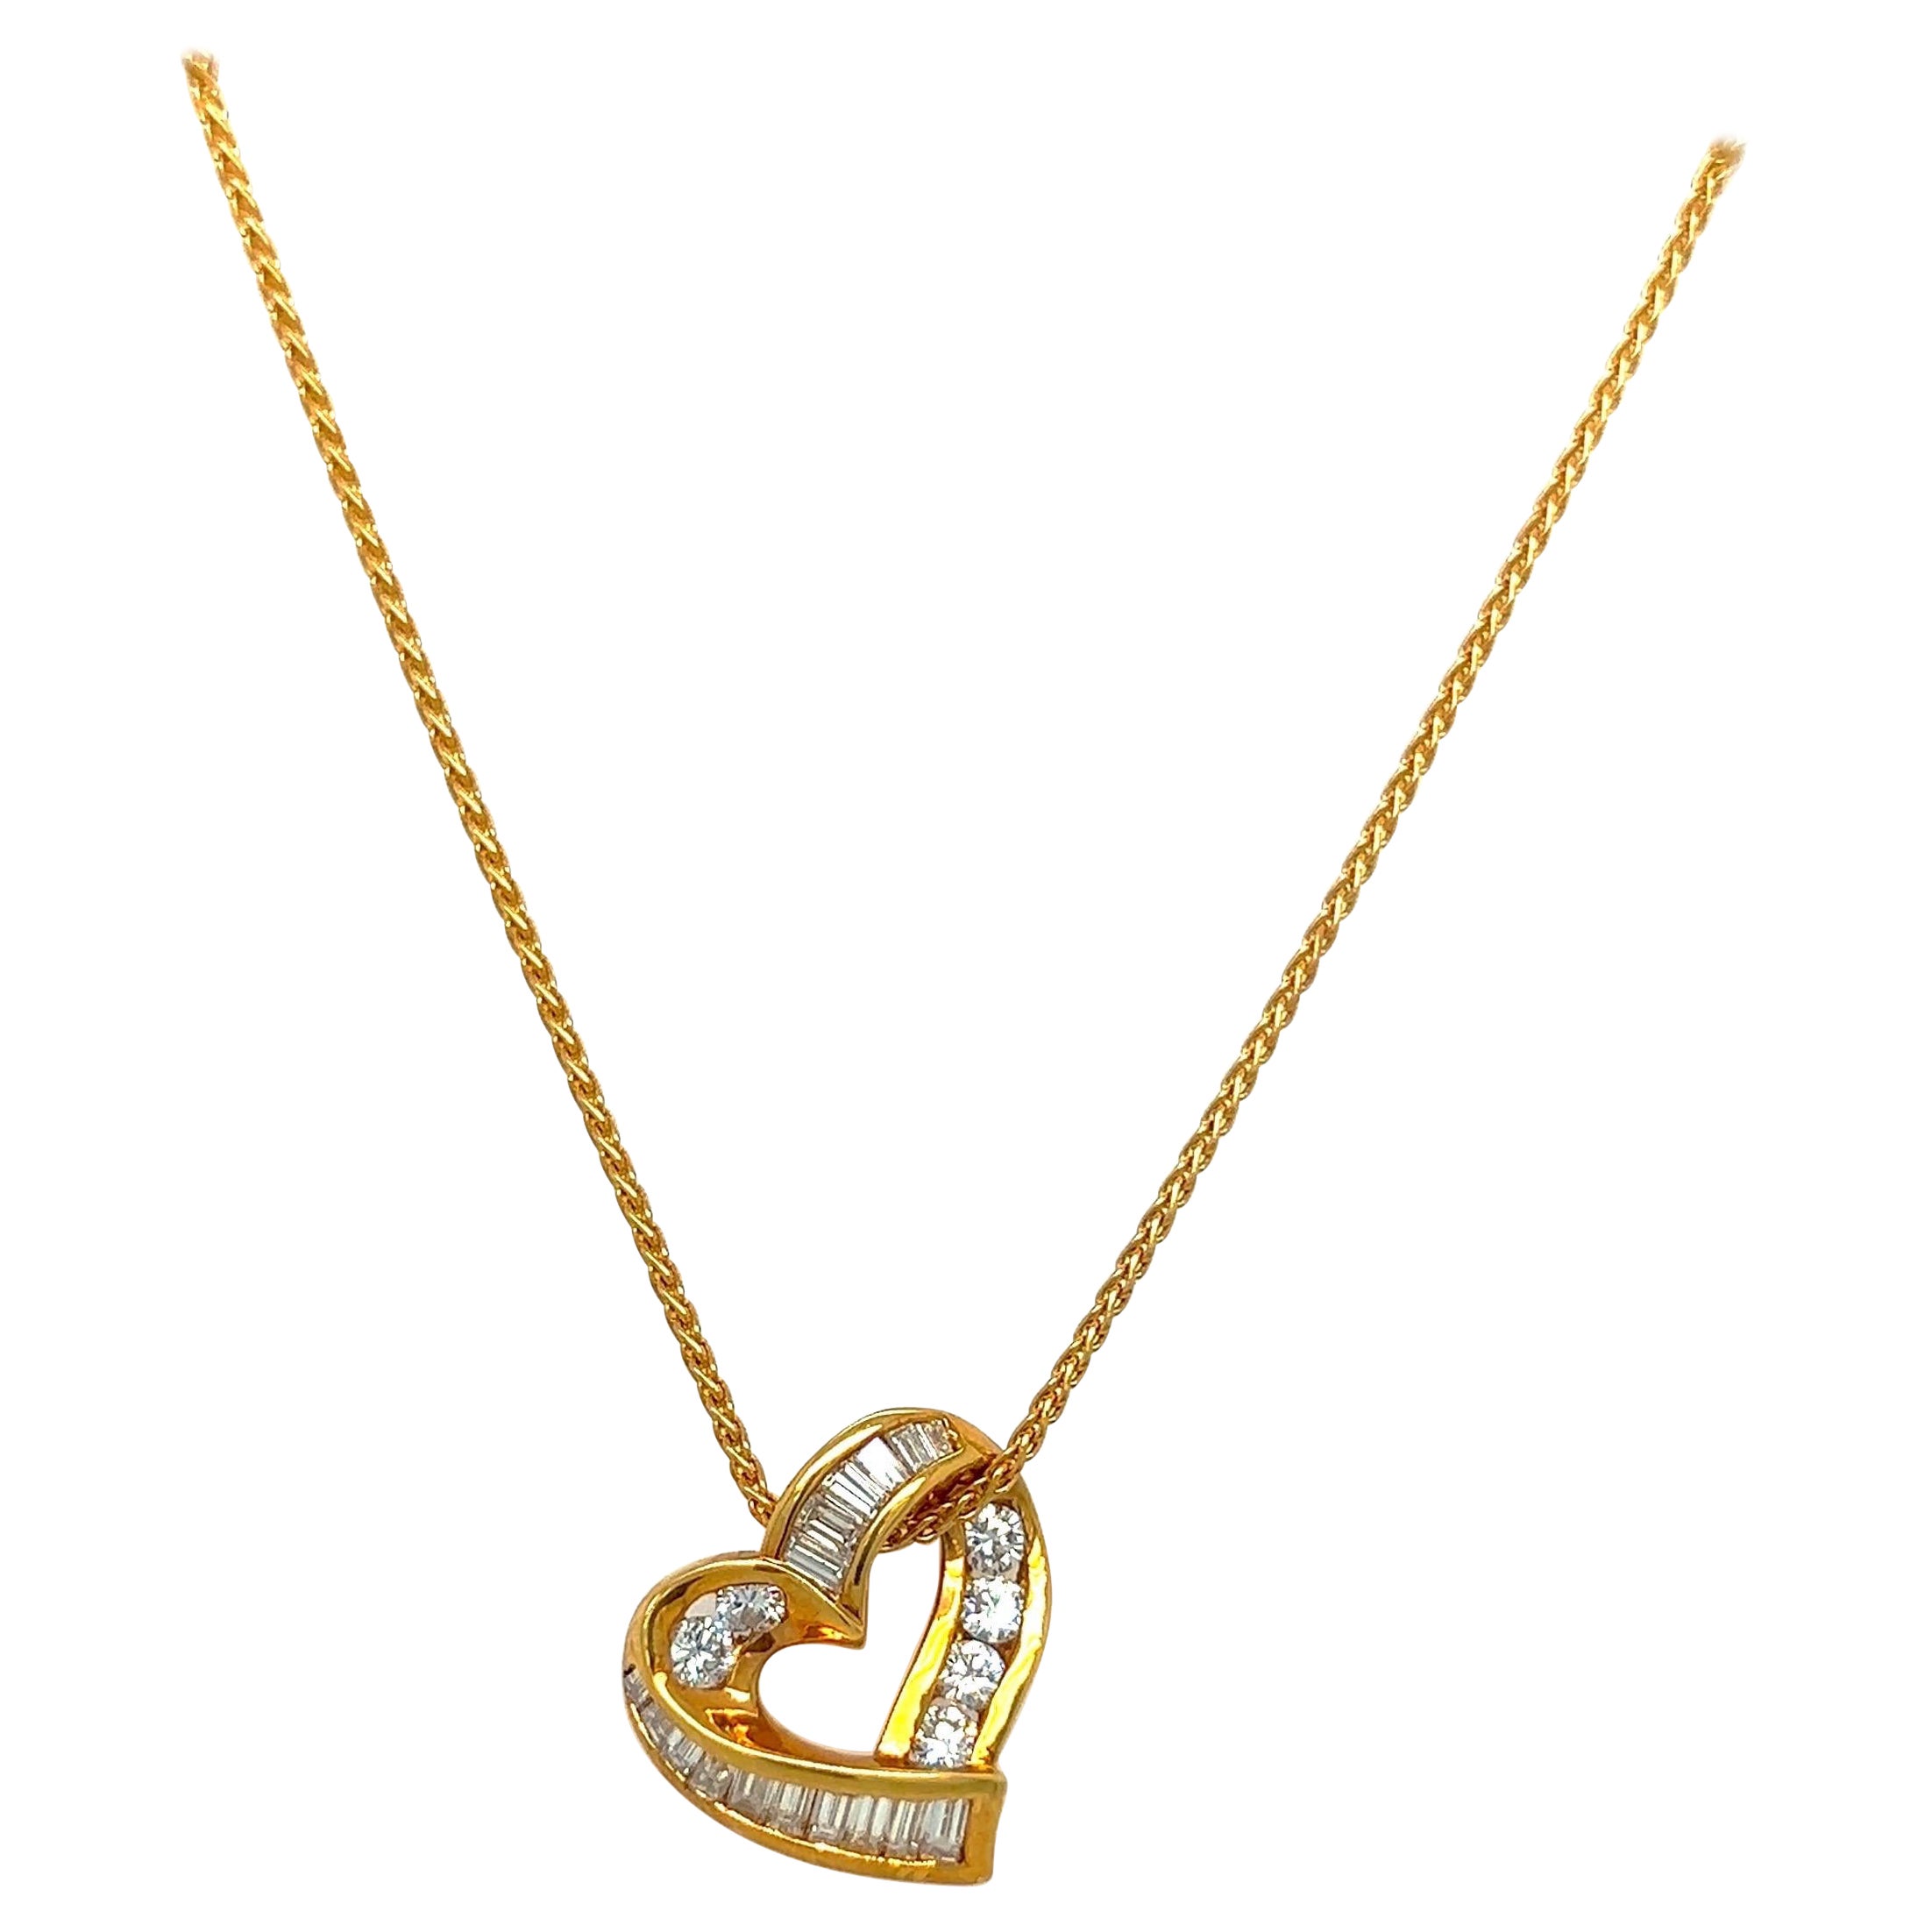 Charles Krypell 18 KT Yellow Gold 1.04 Cts. Diamond Heart Pendant